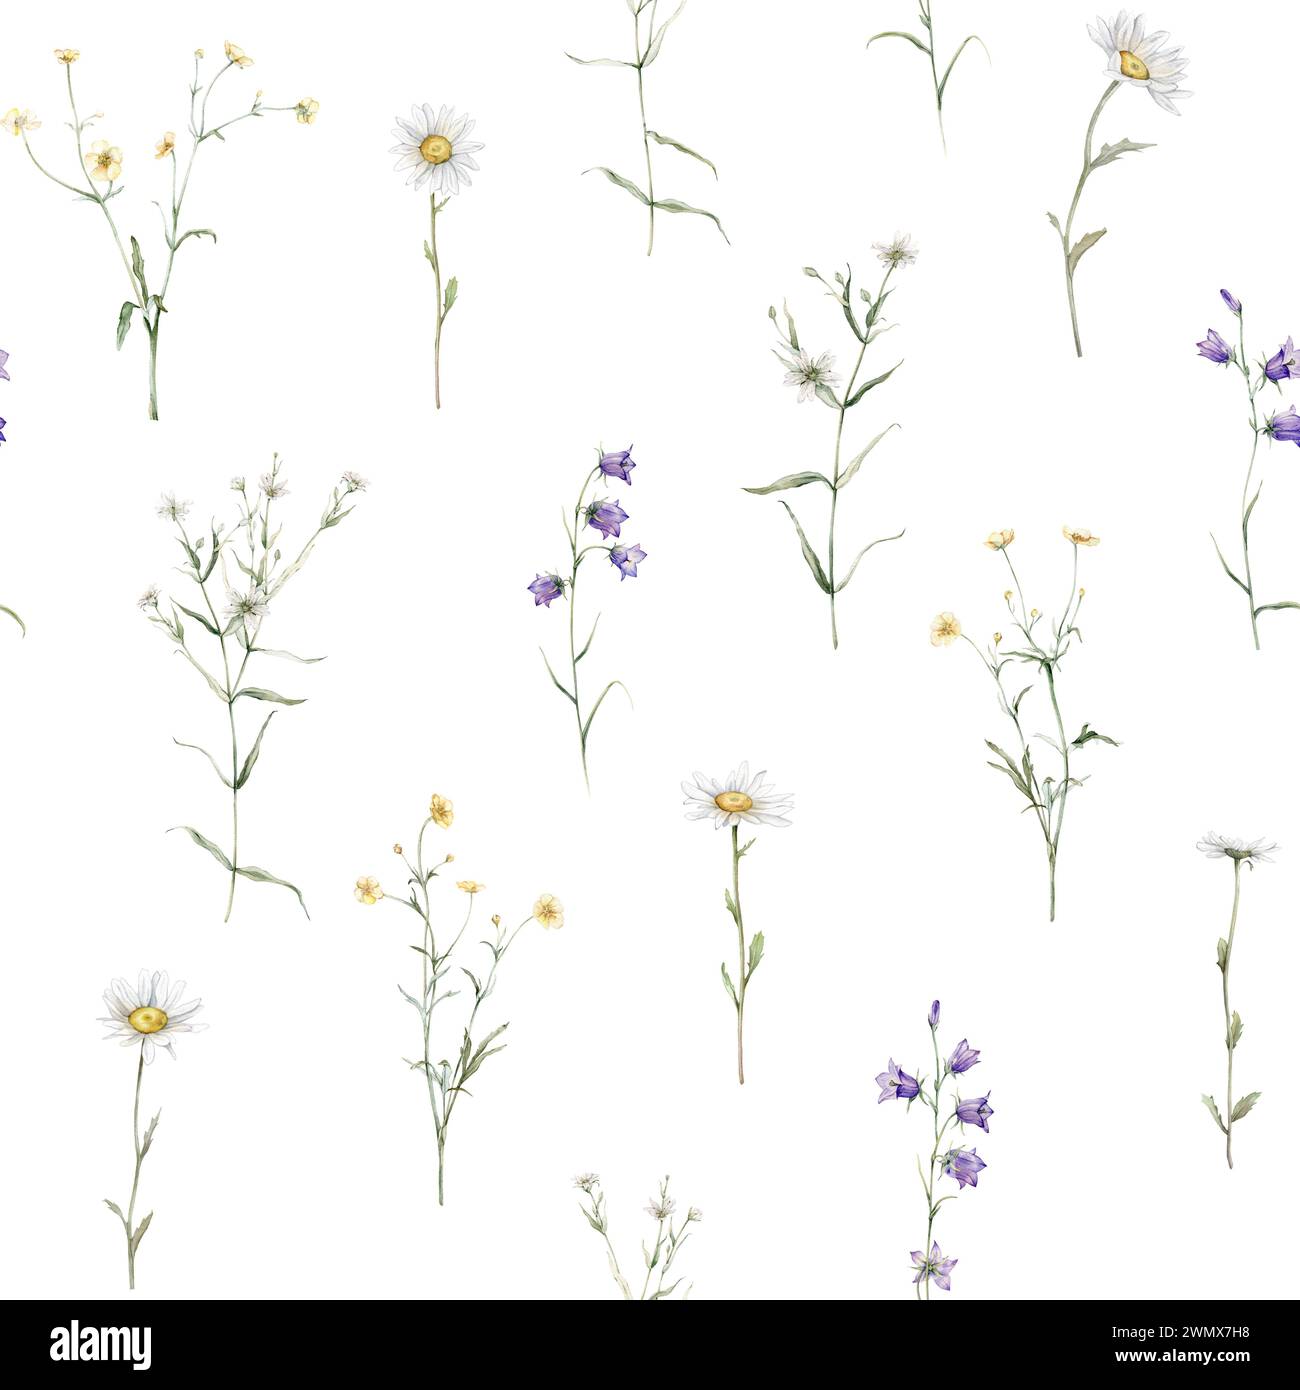 Seamless pattern watercolor meadow flower with white chamomile and violet bluebell. Repeat wallpaper forest flower yellow ranunculus. Hand drawn Stock Photo